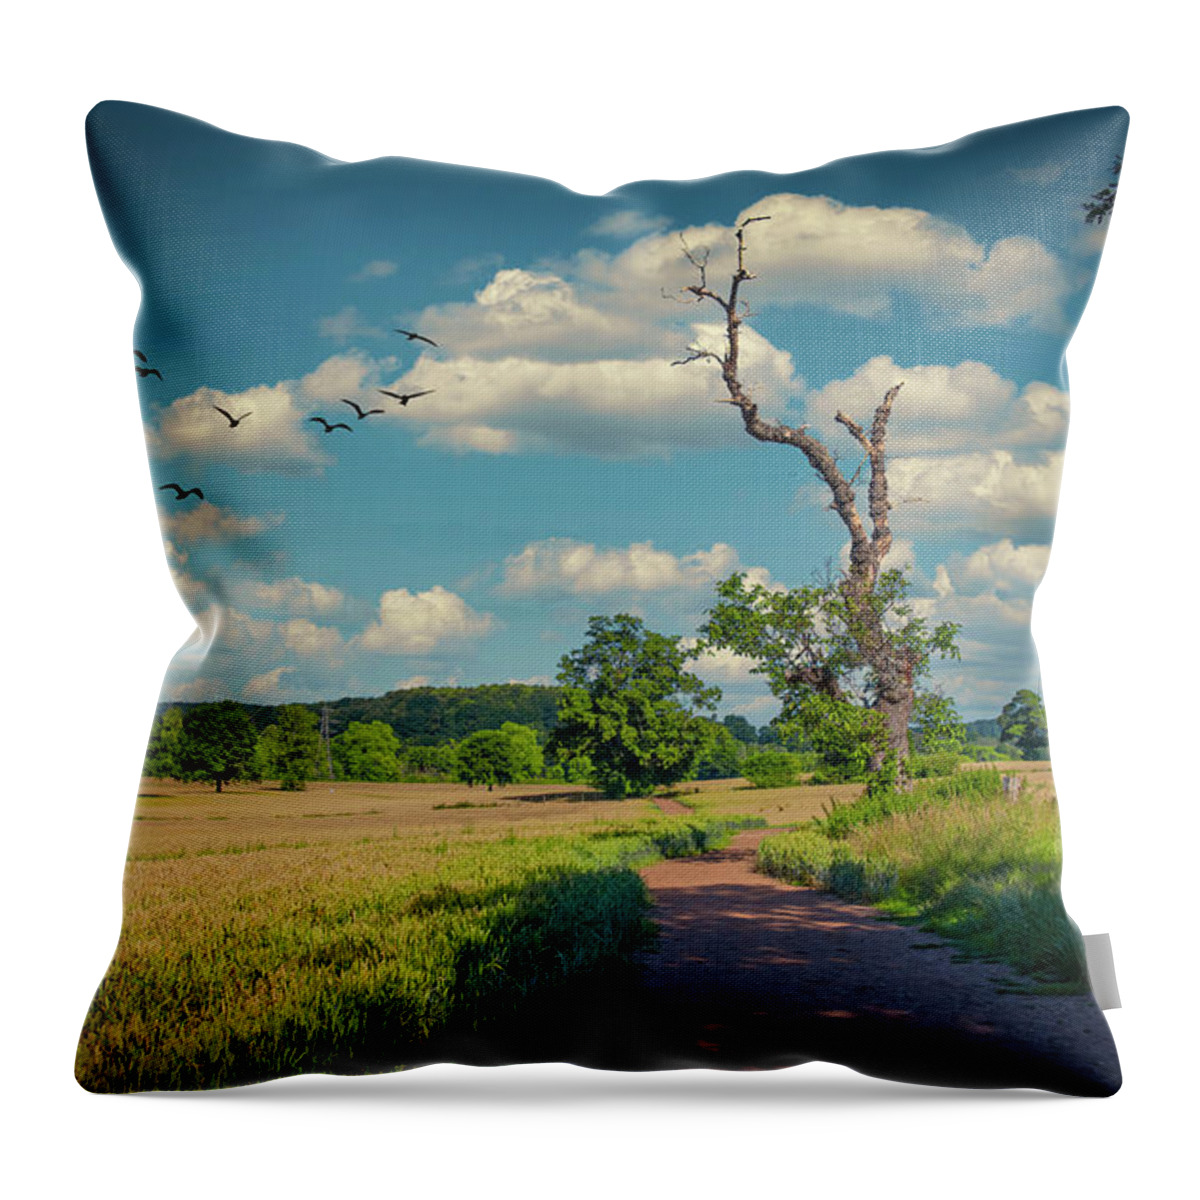 Landscape Throw Pillow featuring the photograph Path 2 by Remigiusz MARCZAK